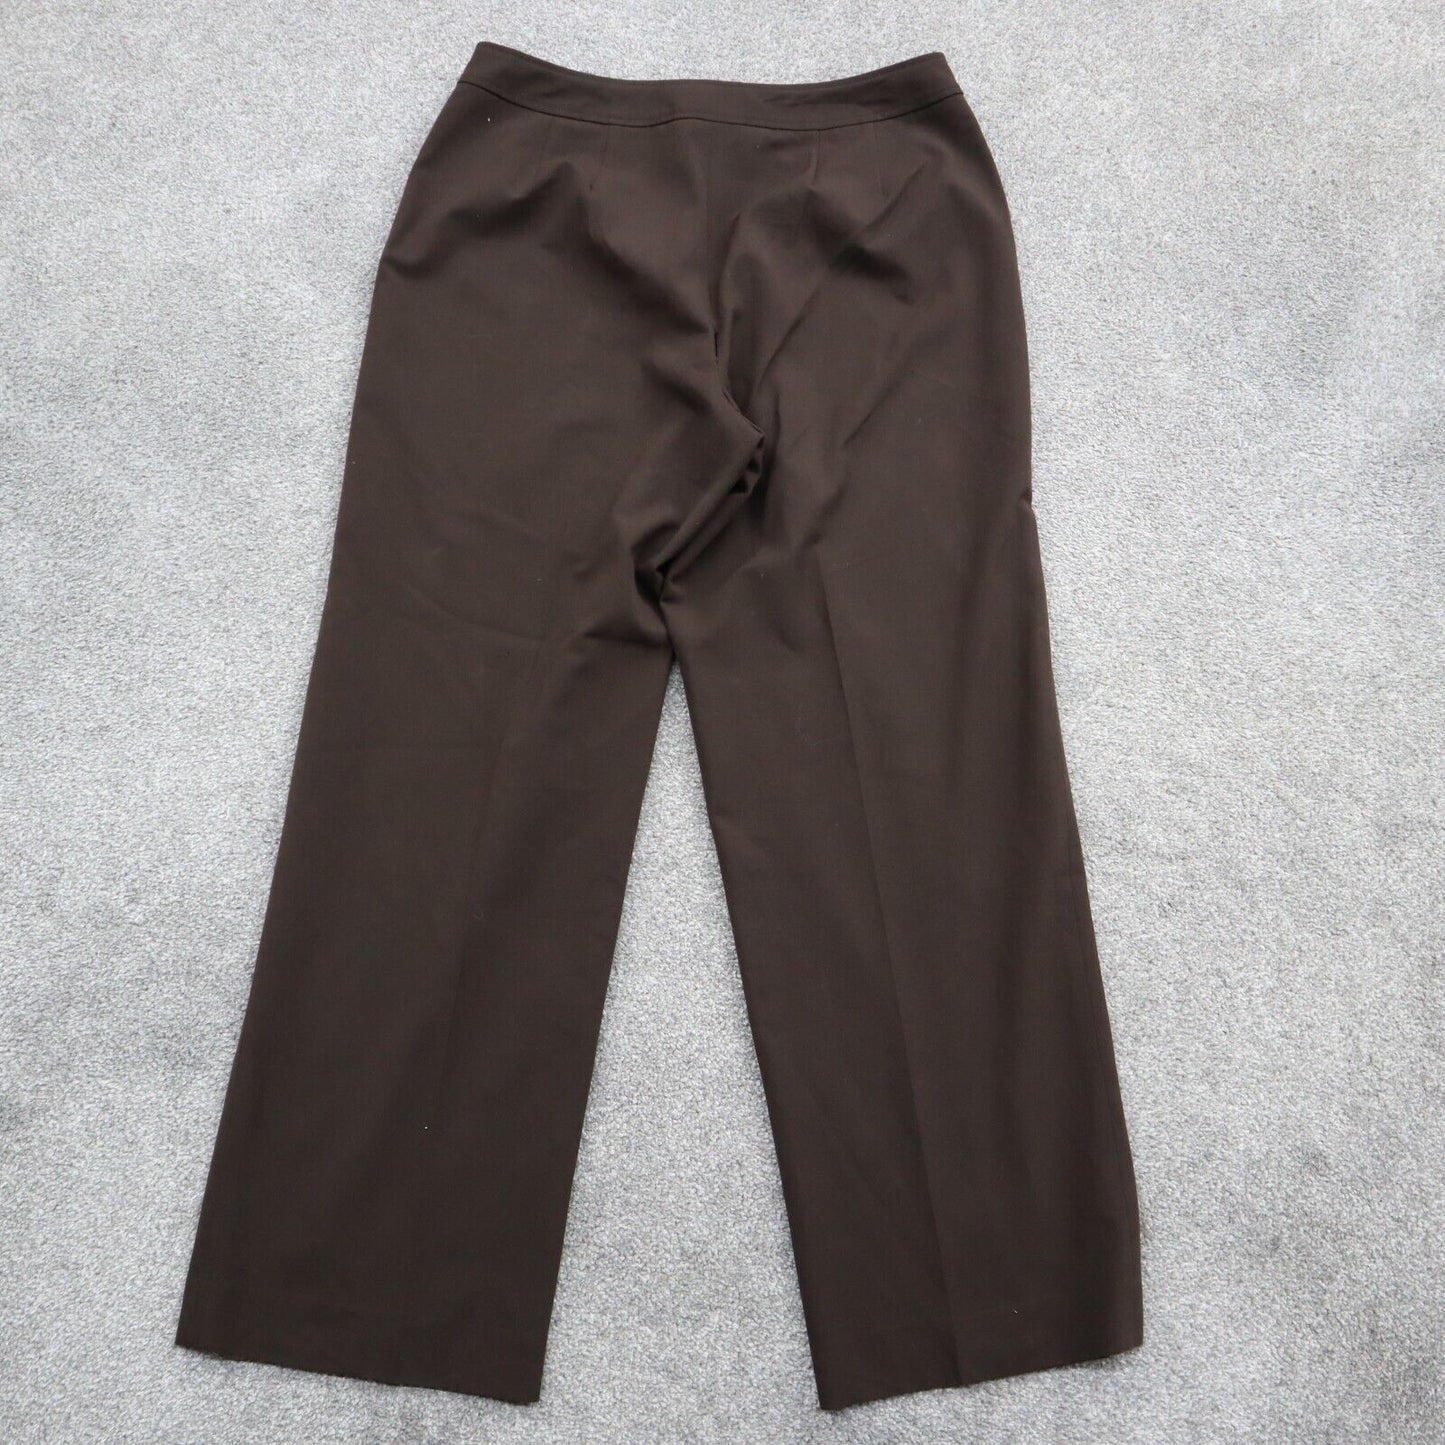 Talbots Womens Casual Wide Leg Pant Stretch Mid Rise Flat Front Brown Size 10